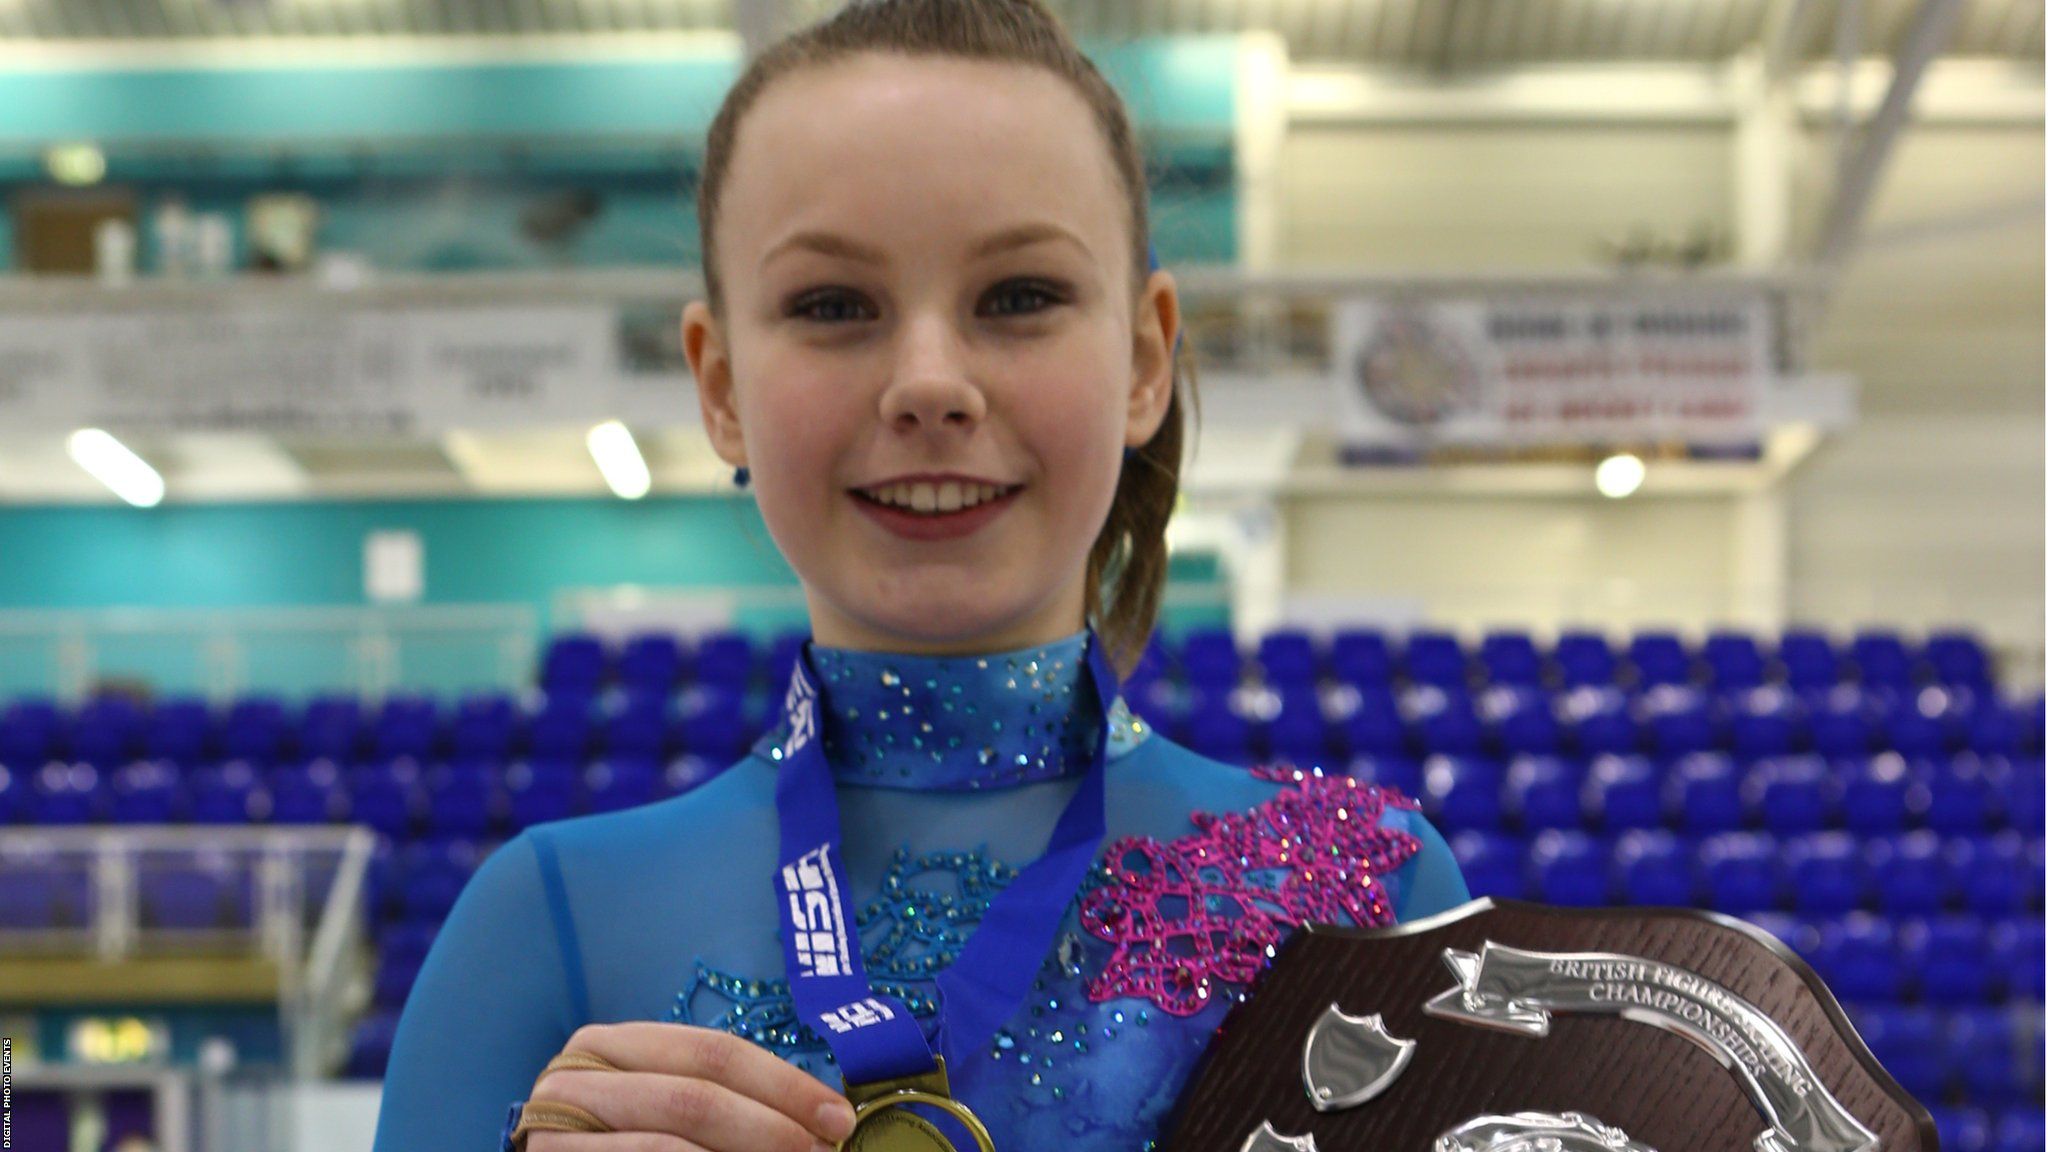 Christie Anne Shannon holds the trophy for winning the Basic Novice A British Figure Skating title